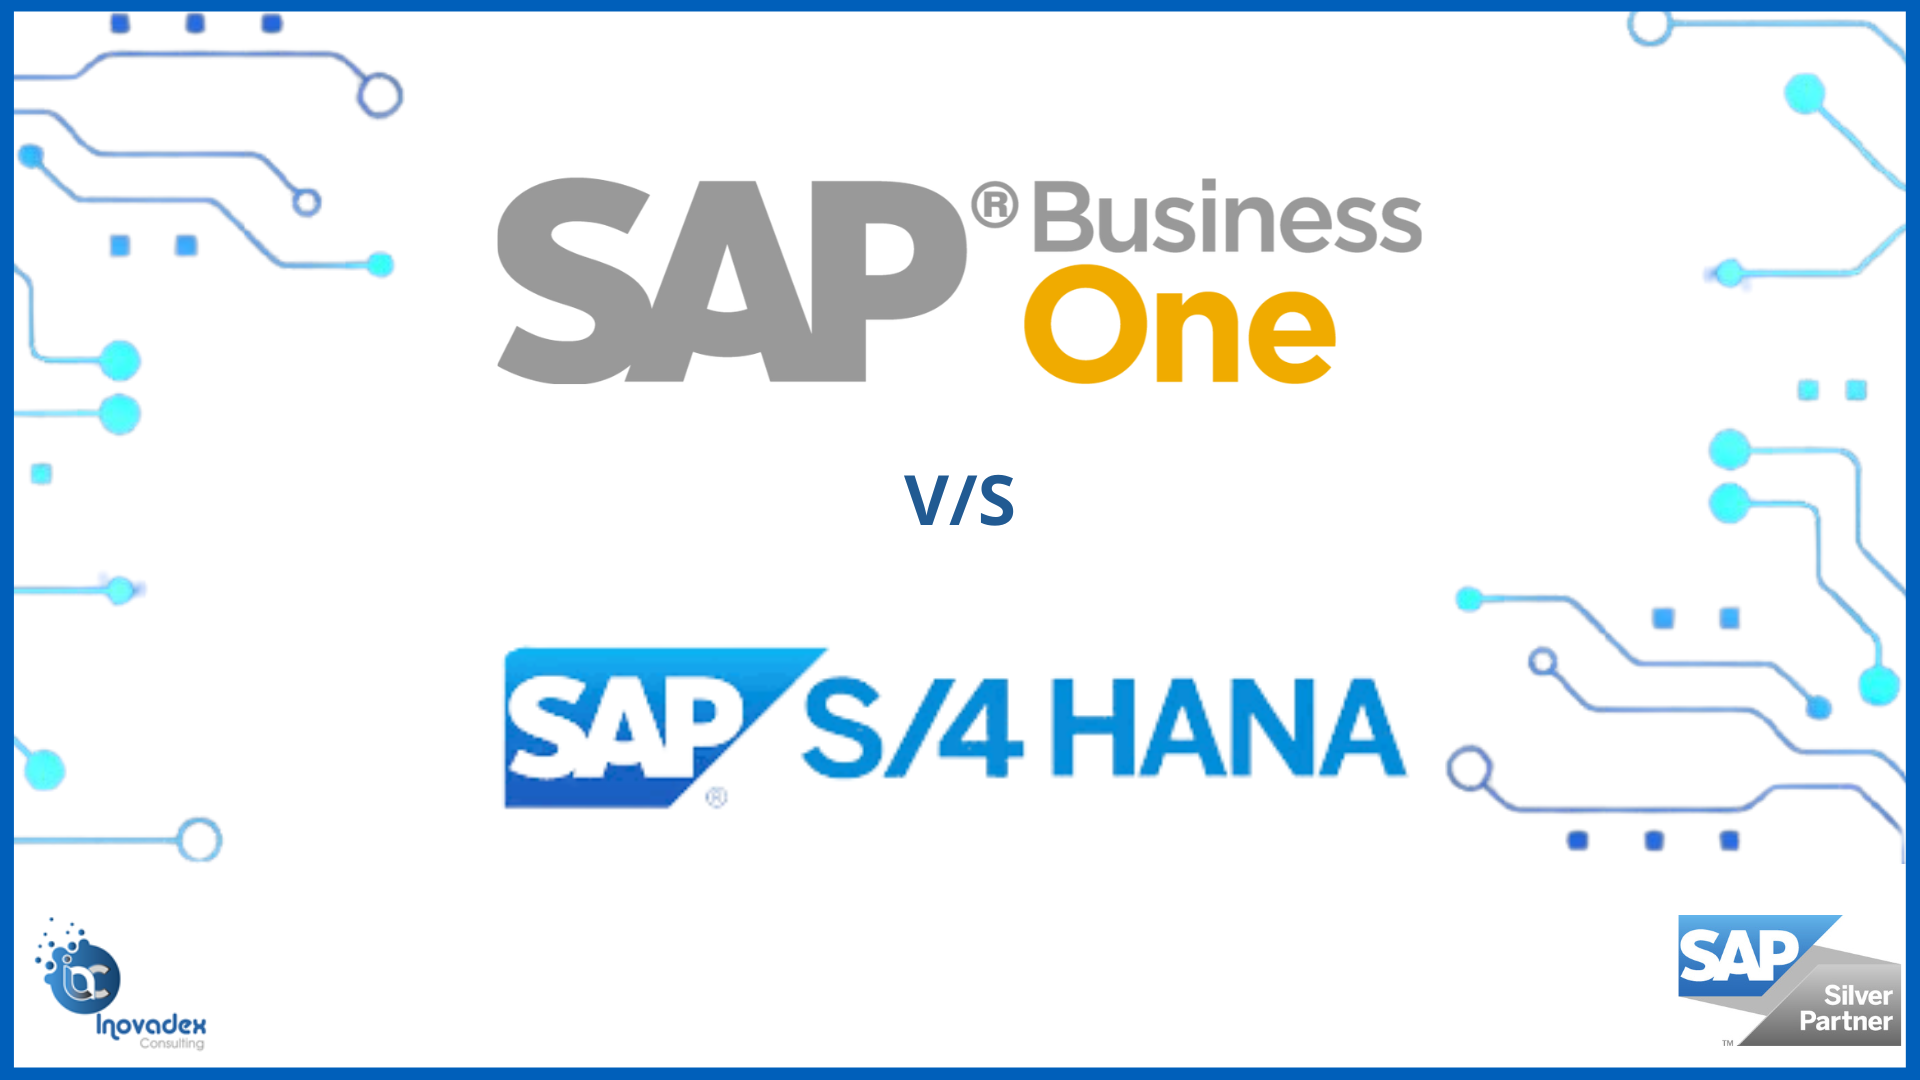 sap business one